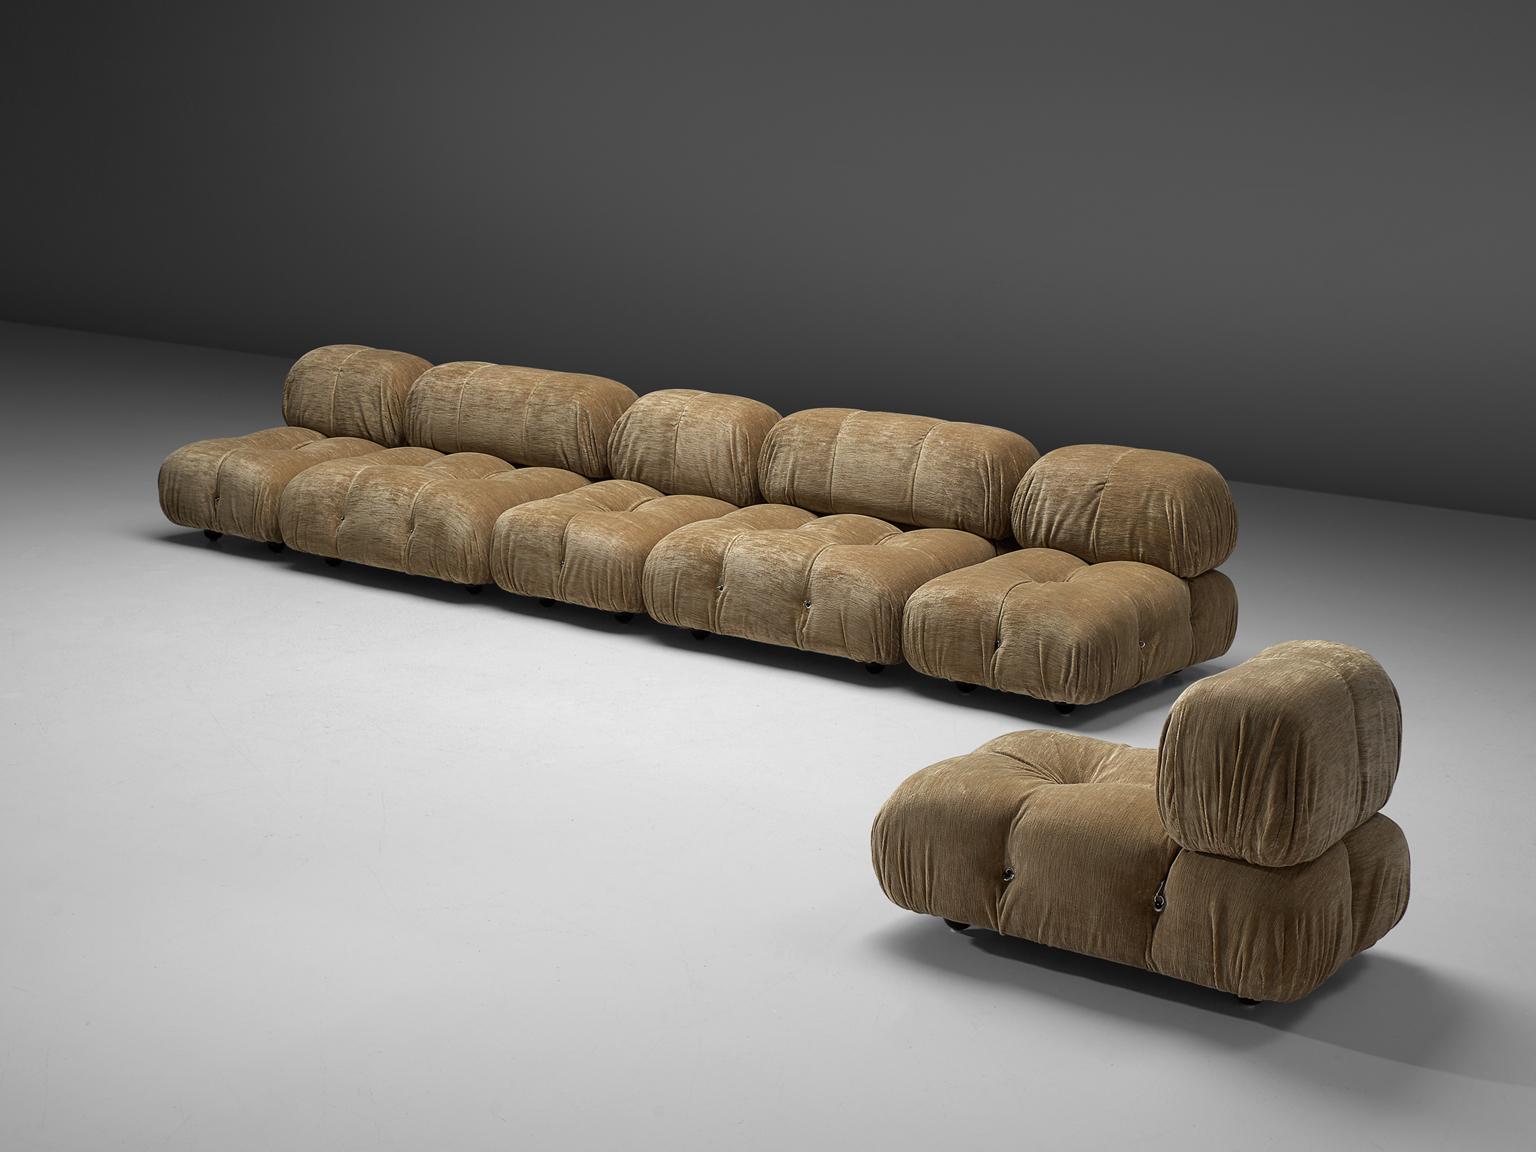 Mario Bellini, large modular 'Cameleonda' sofa, beige Pierrre Frey upholstery, Italy, 1971, reupholstered by our in-house upholstery atelier. 

The sectional elements this sofa was made with, can be used freely and apart from one another. The